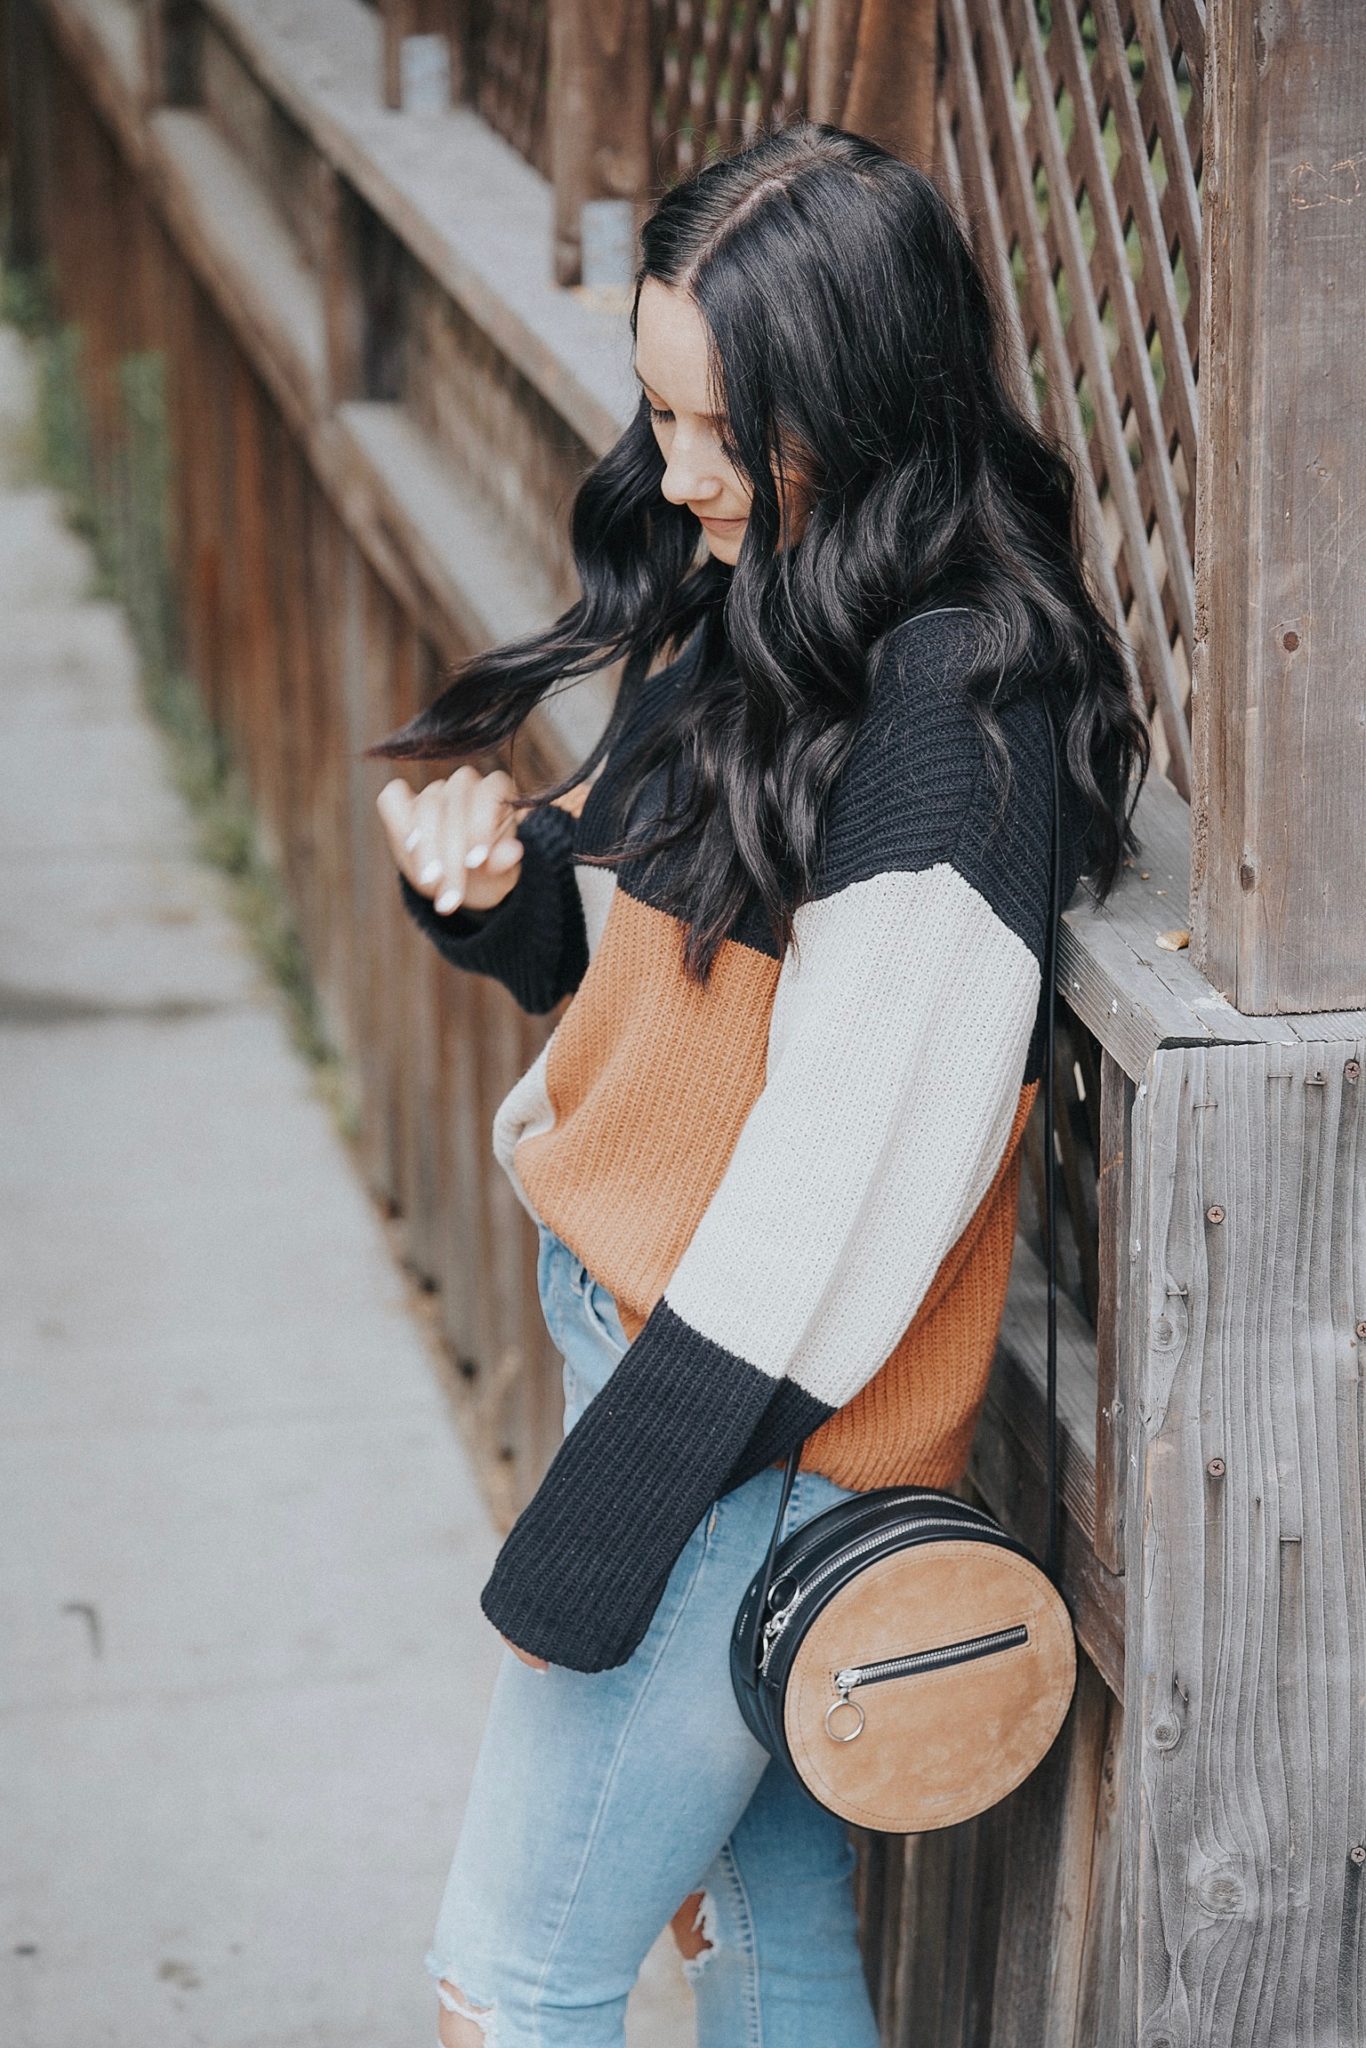 Cute Fall Sweaters You'll Want for the Season featured by popular Las Vegas fashion blogger, Outfits & Outings: Nordstrom Colorblock Sweater